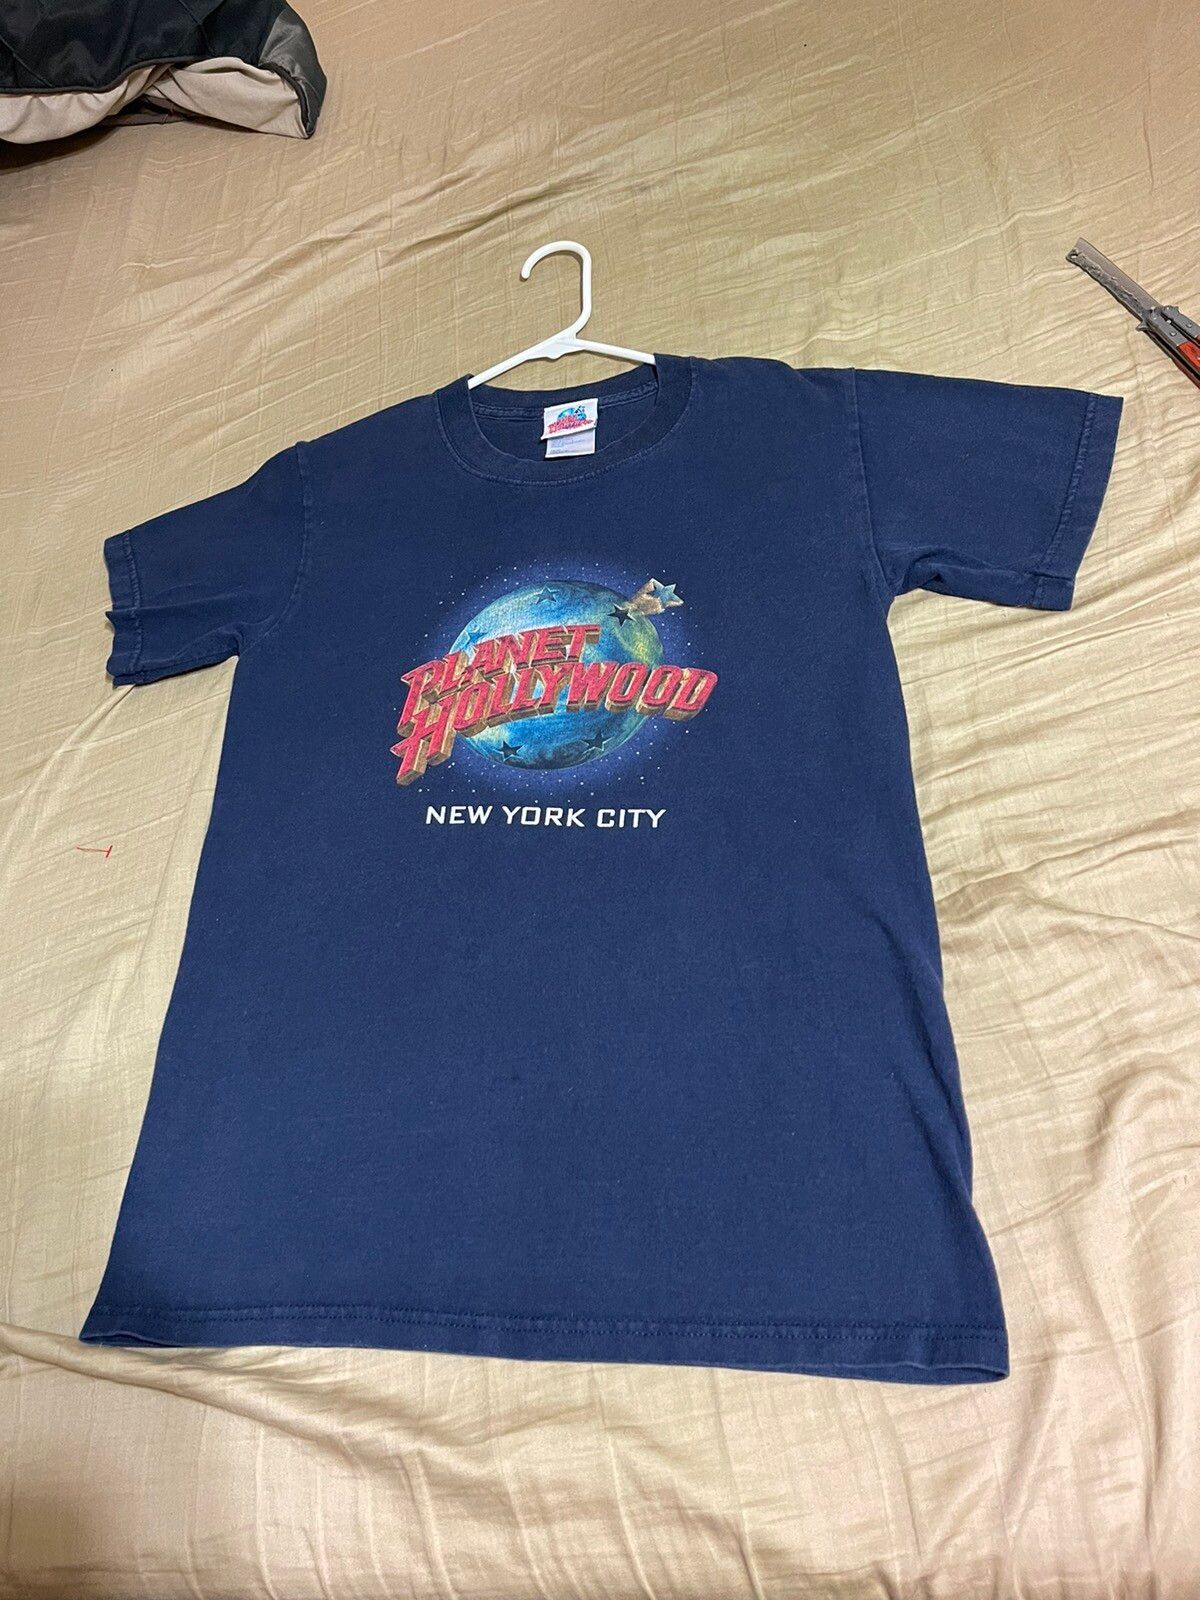 Planet Hollywood Vintage 1998 Planet Hollywood Tee Size US S / EU 44-46 / 1 - 1 Preview